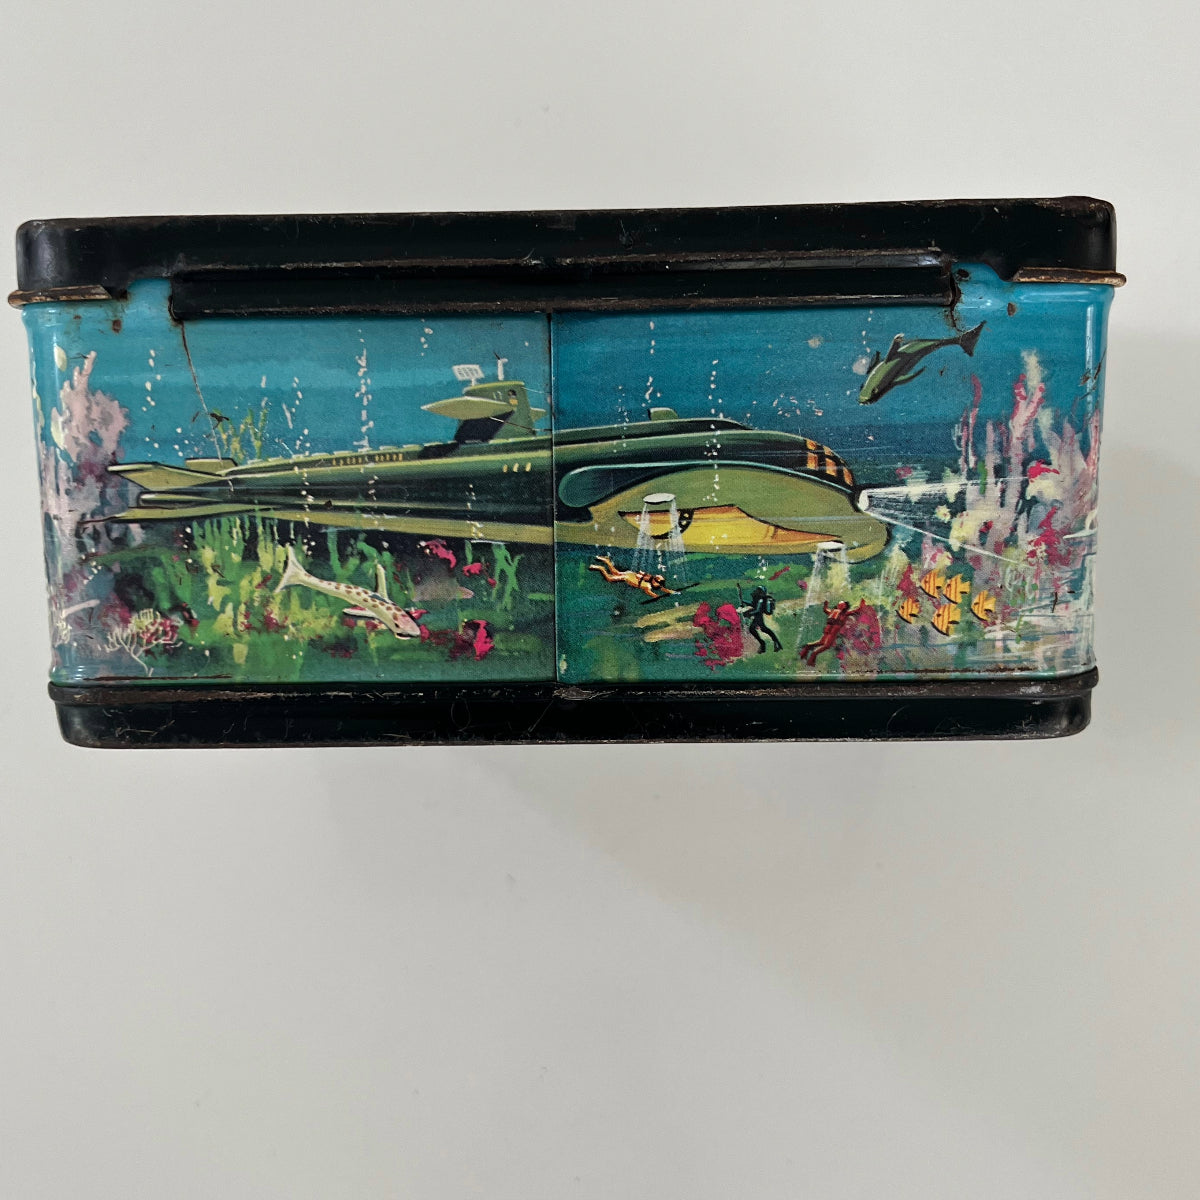 Rare Vintage 1967 Voyage To The Bottom Of The Sea Lunchbox Only no thermos